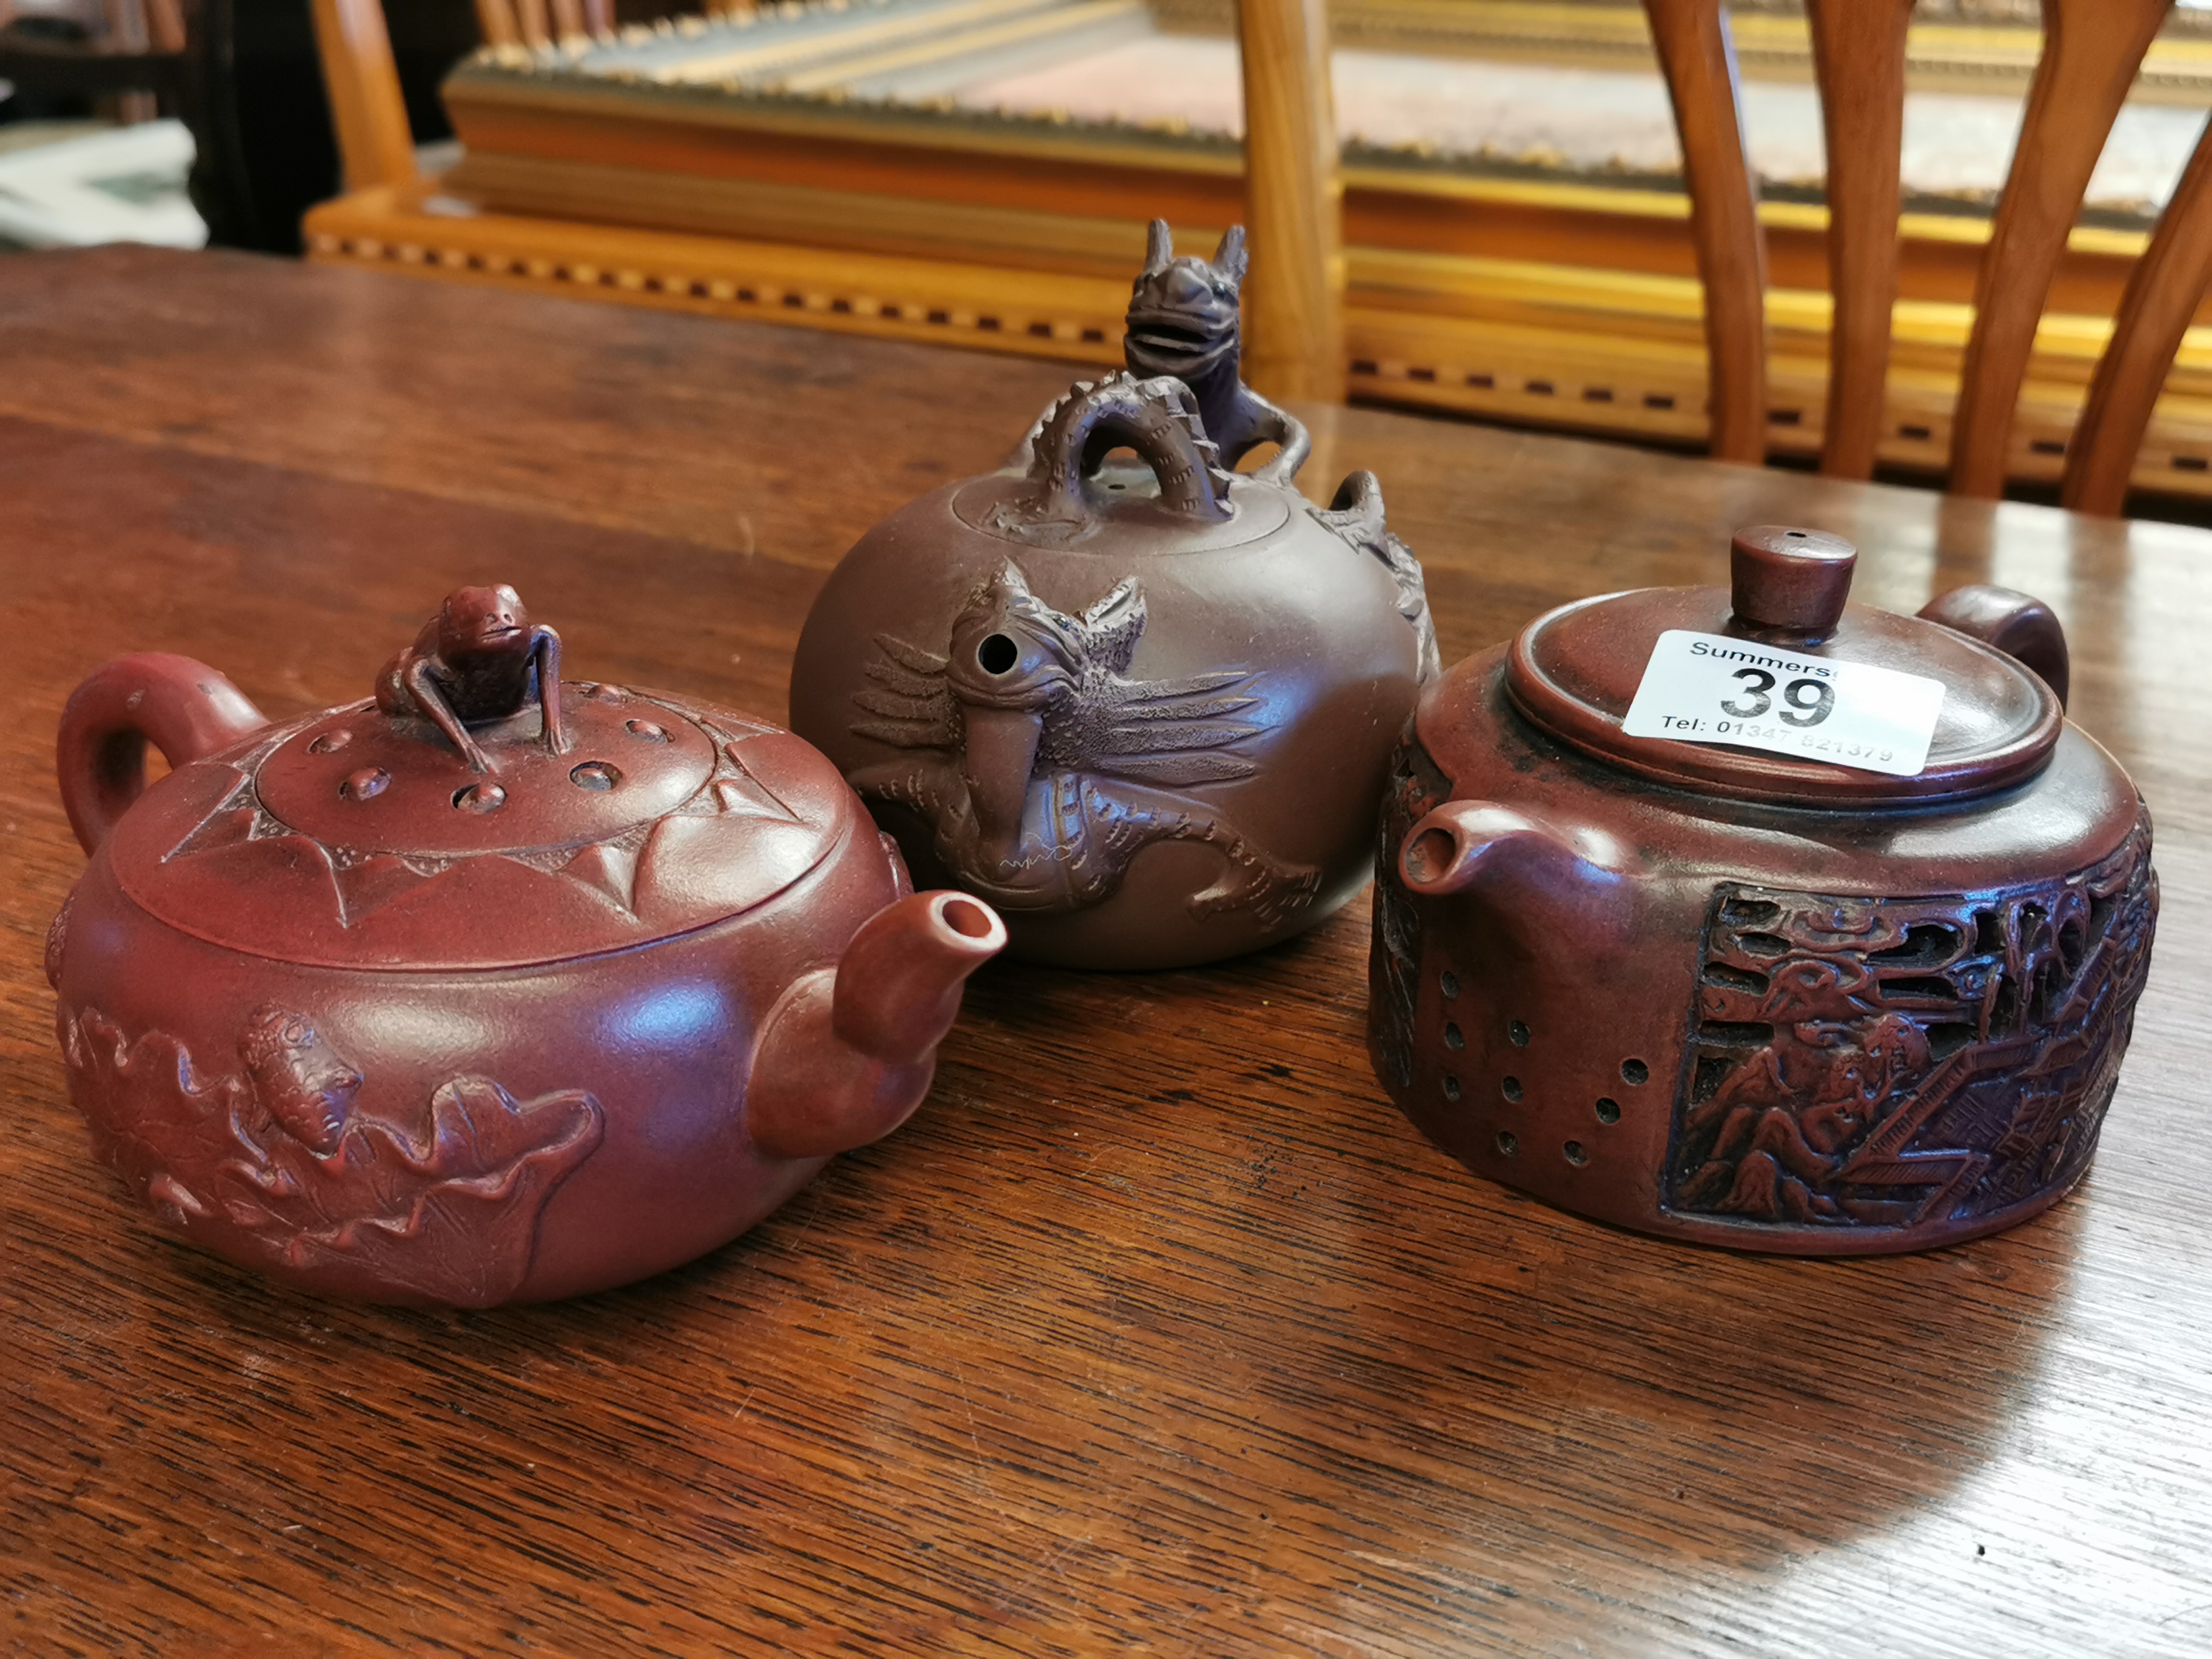 3pc Chinese Pottery Teaset w/character marks to base